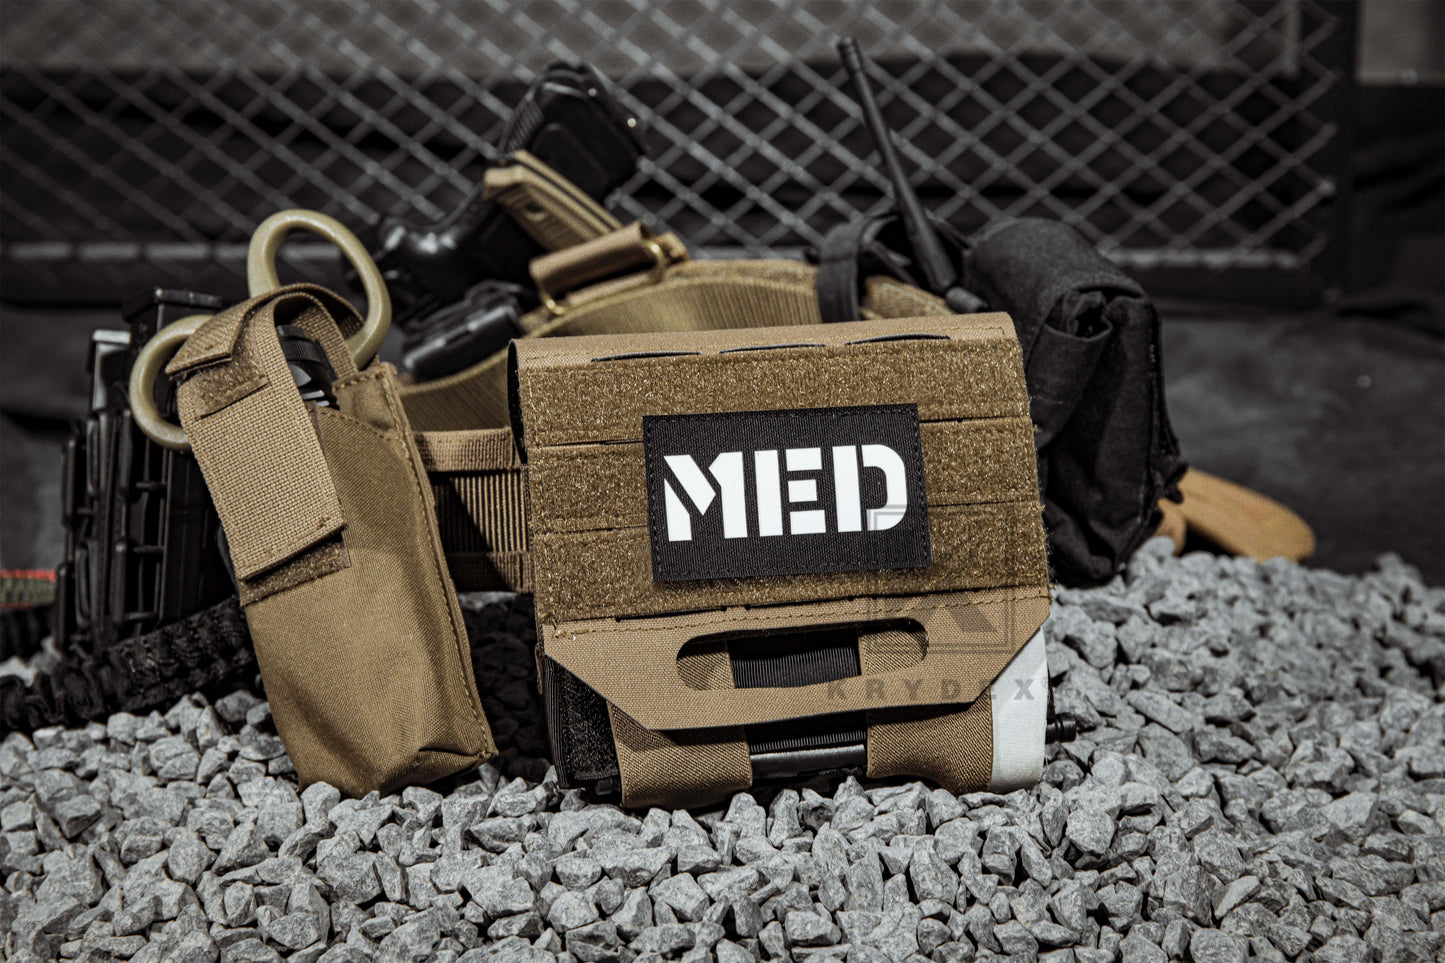 Krydex Tactical IFAK Medical Pouch Duty Belt MOLLE First AID Trauma Kit Pouches Outdoor Survival Medic Bag